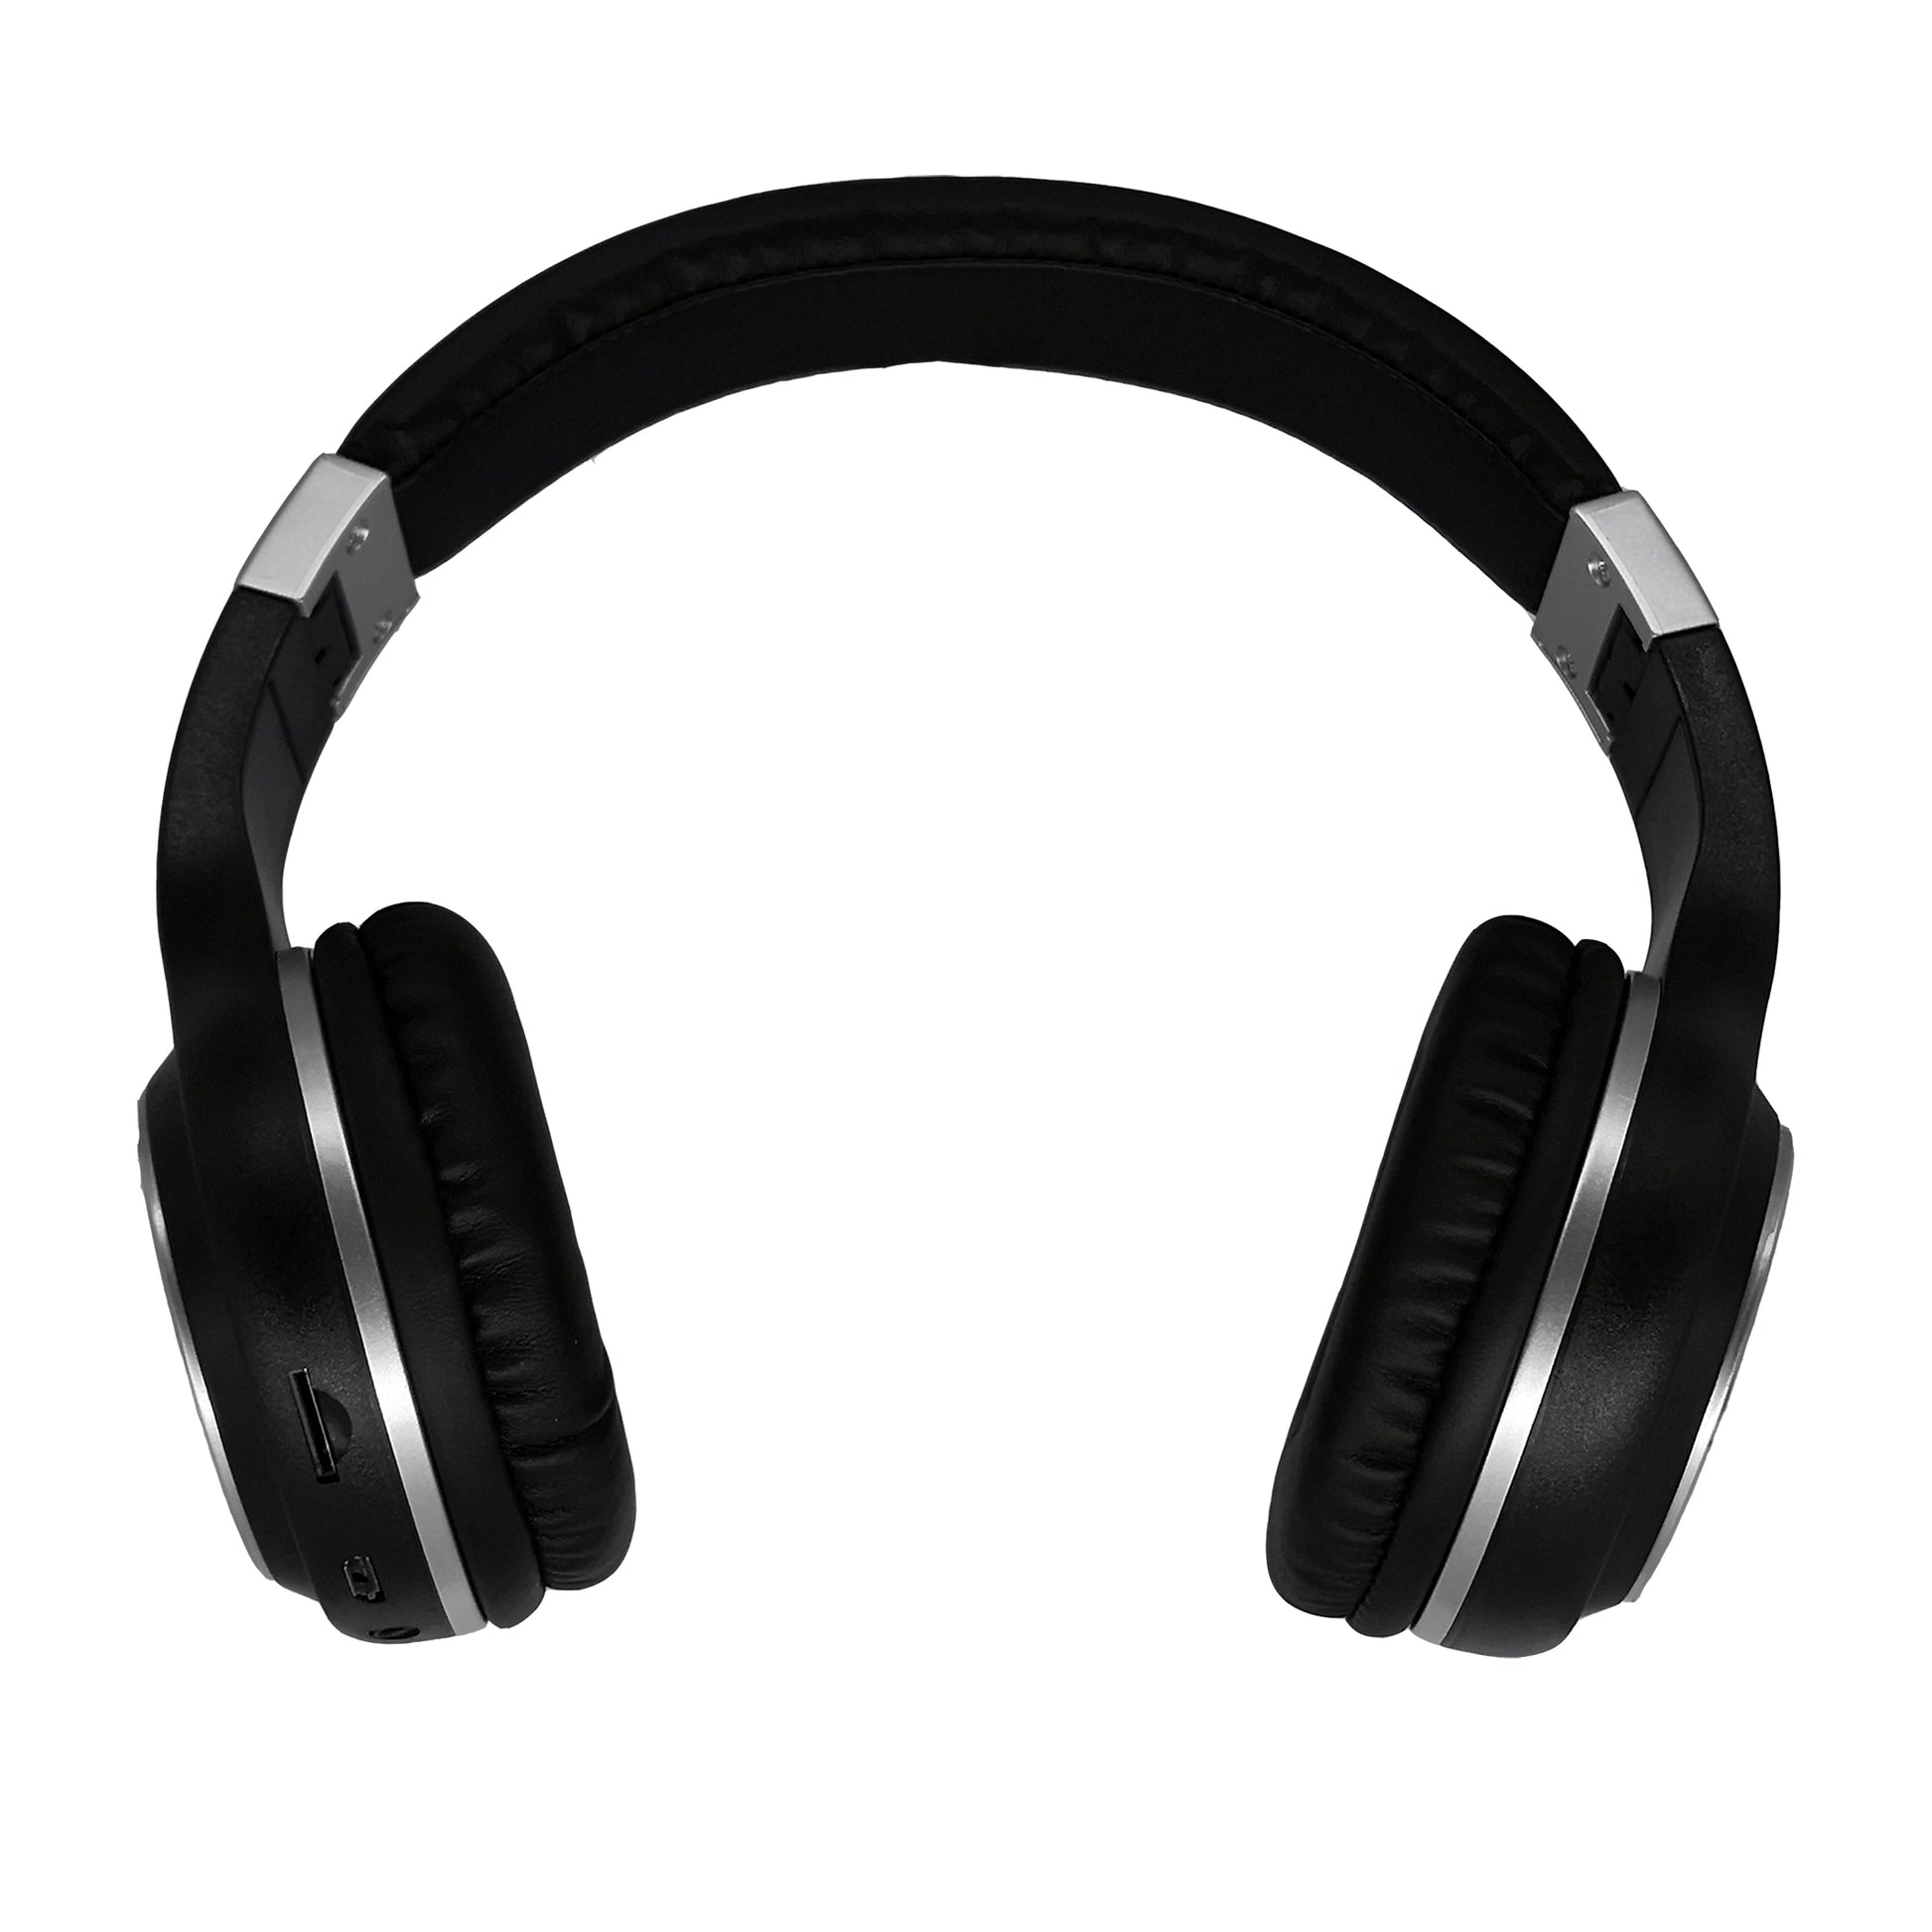 Photo of Morpheus 360 Serenity Wireless Over Ear Headphones showing the Serenity headphones from a view of being placed on ones head.